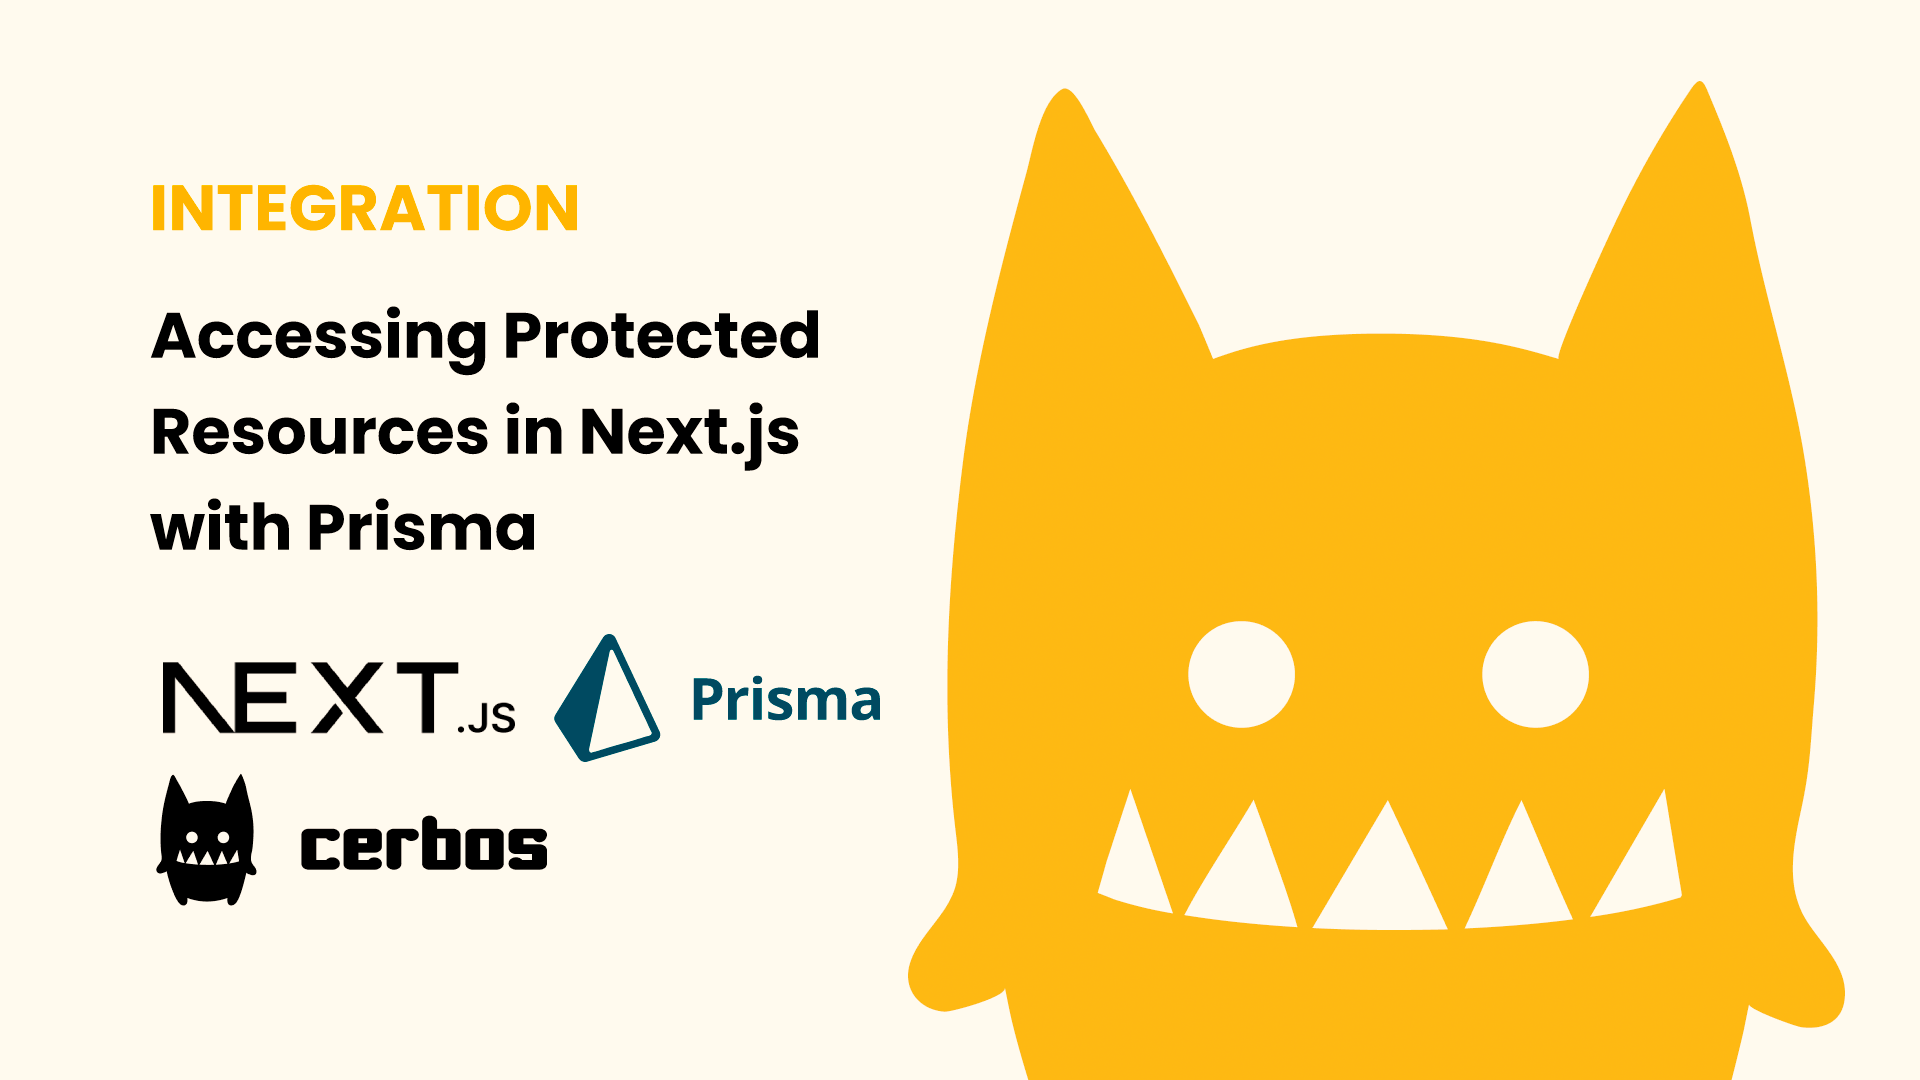 Accessing Protected Resources in Next.js with Prisma